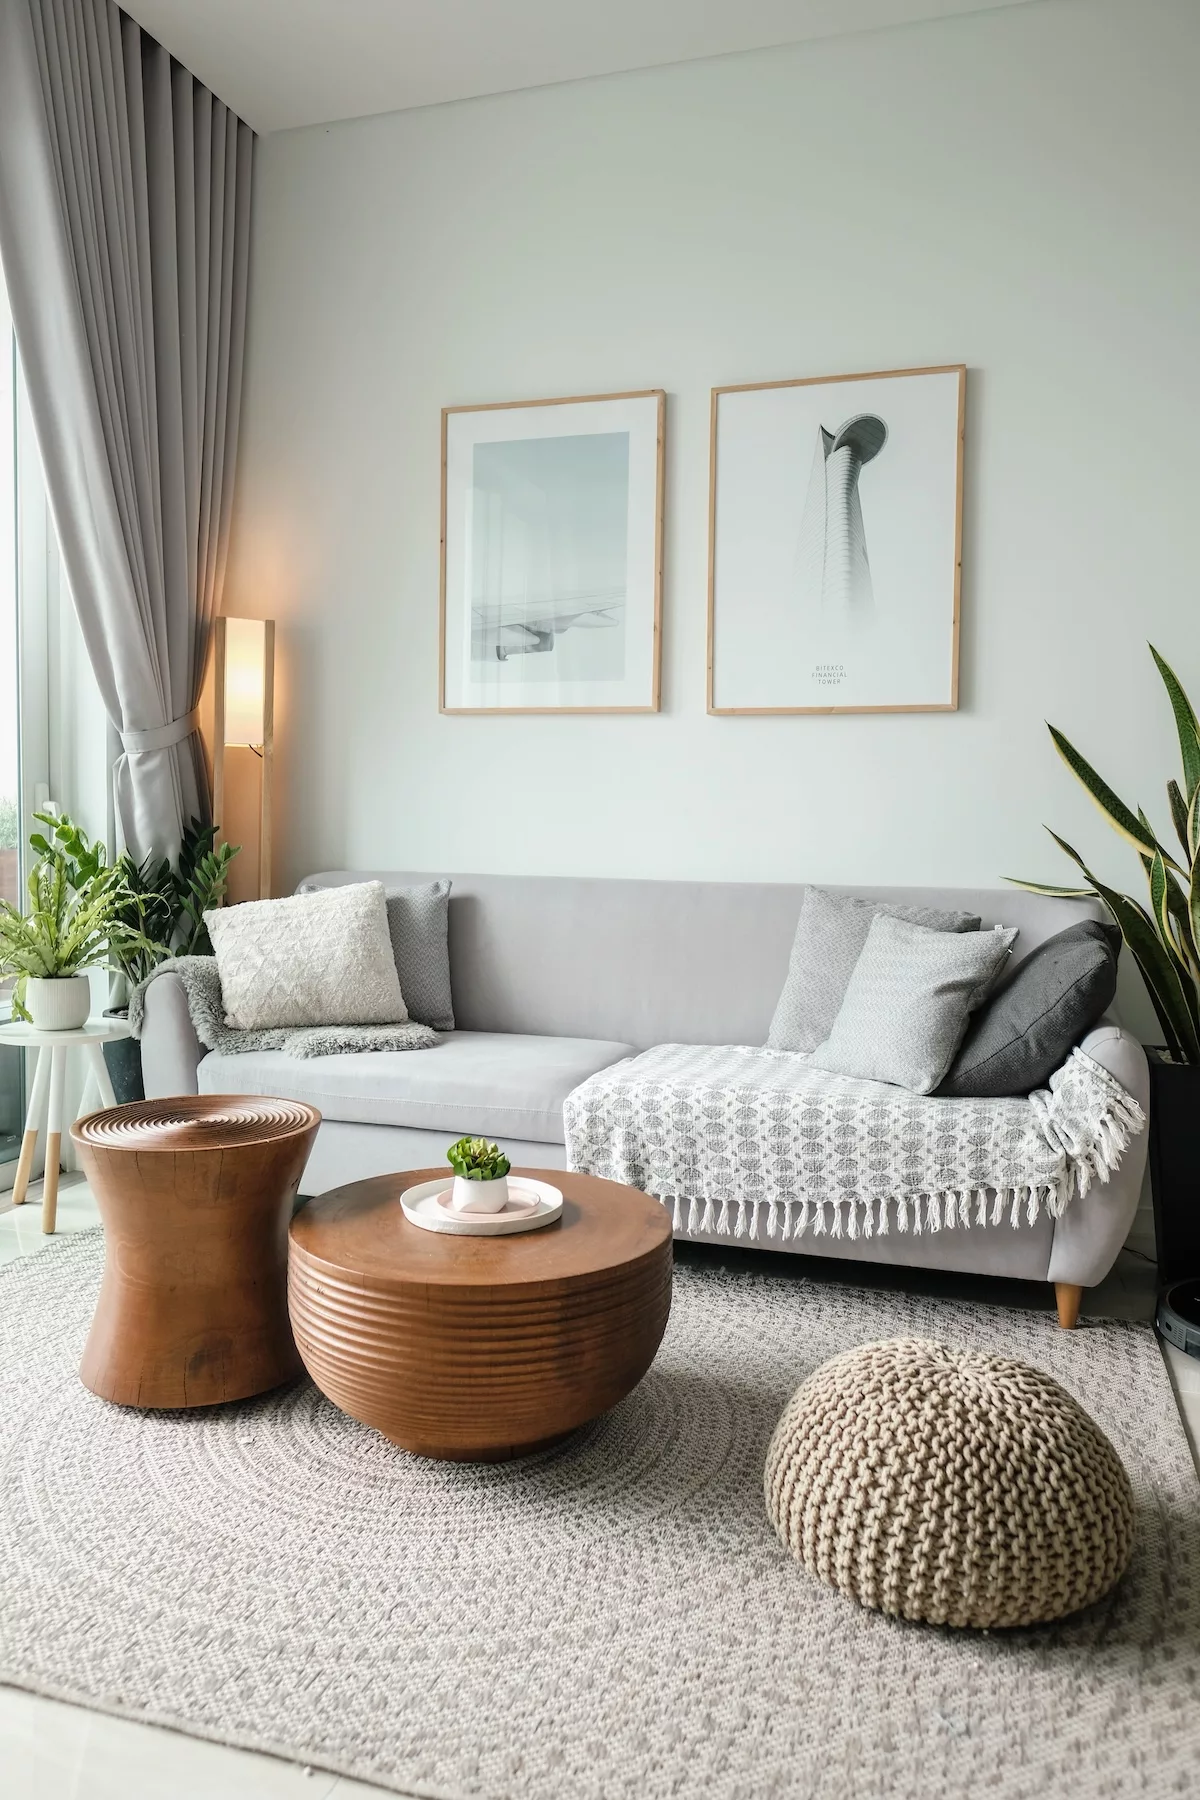 A cozy apartment living room with a gray couch, coffee table, and rug, creating a stylish and inviting space.